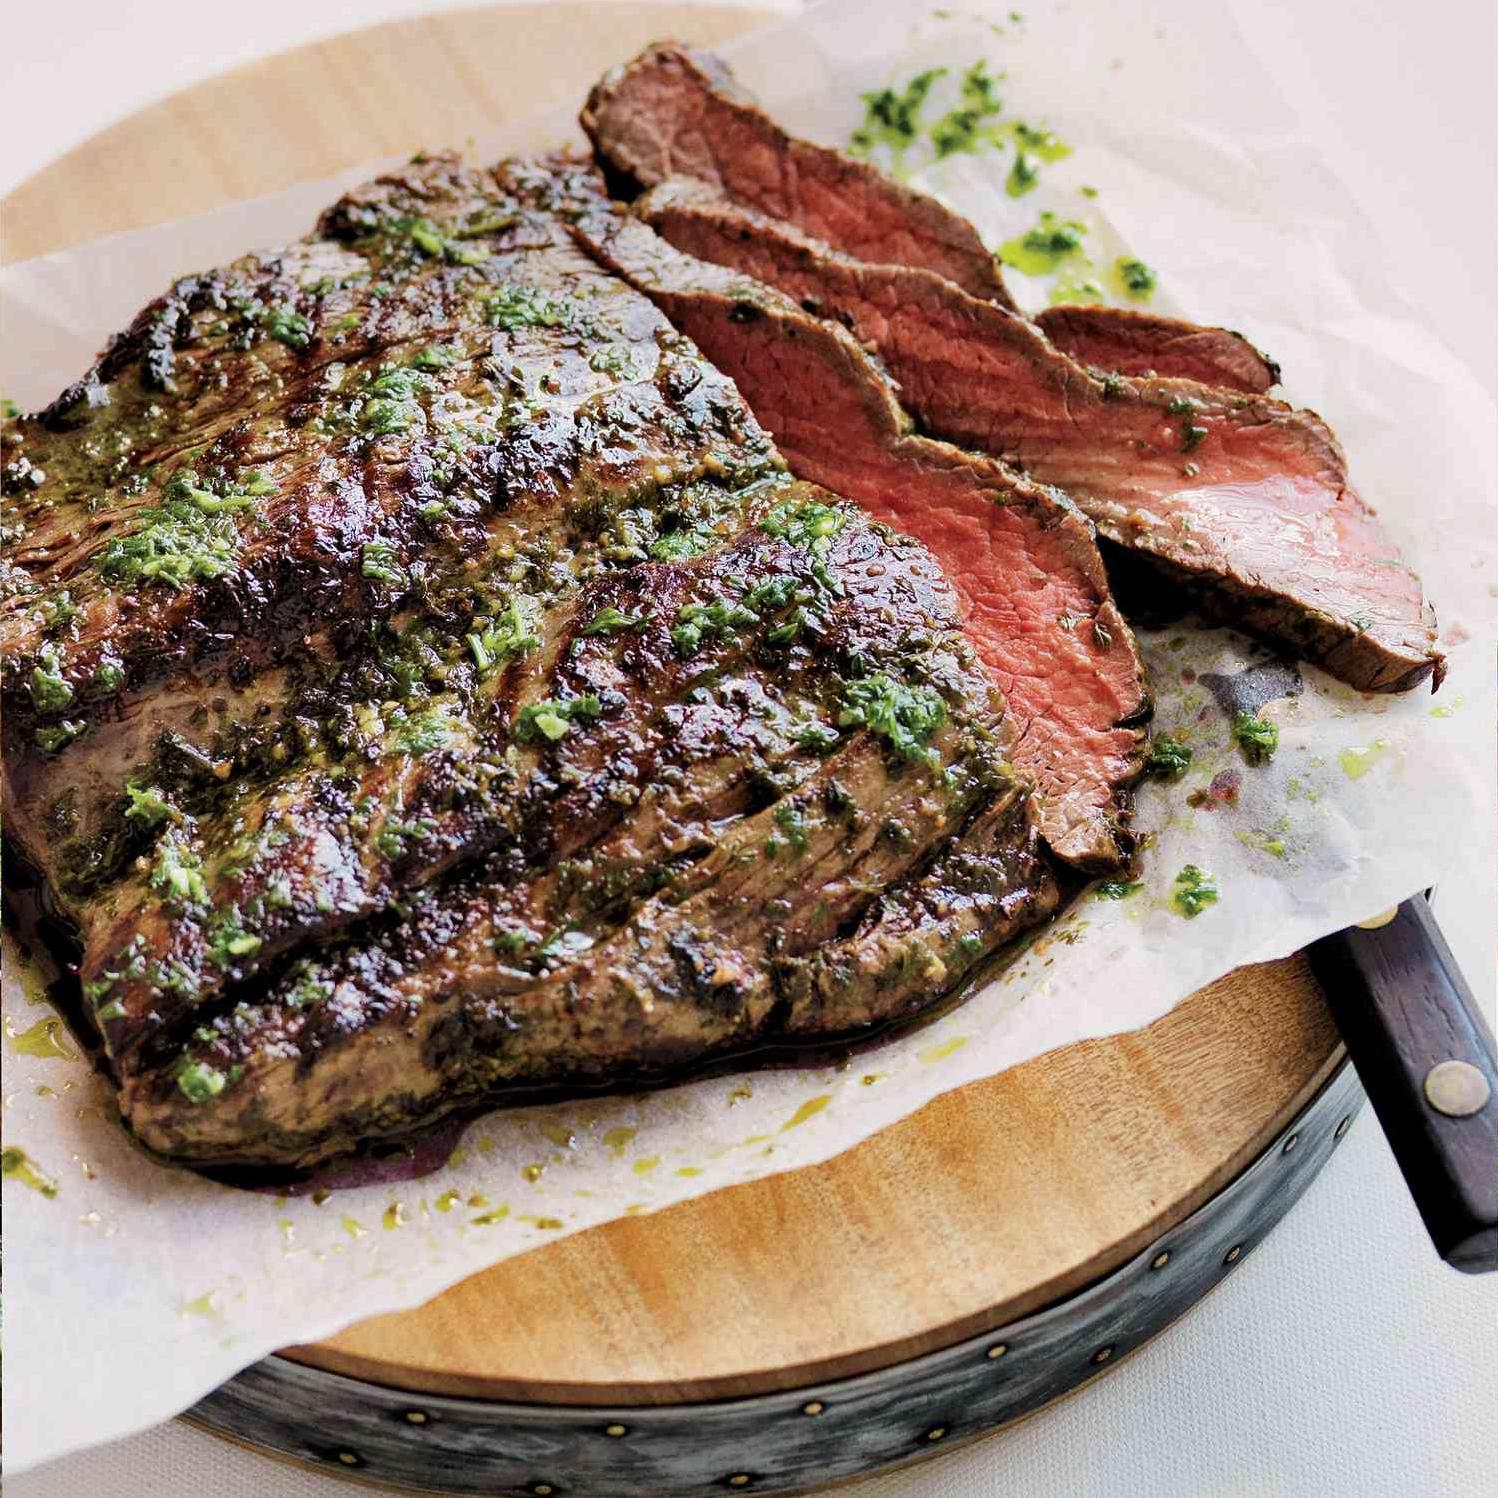  Get ready to fire up the grill for some mouthwatering churrasco.